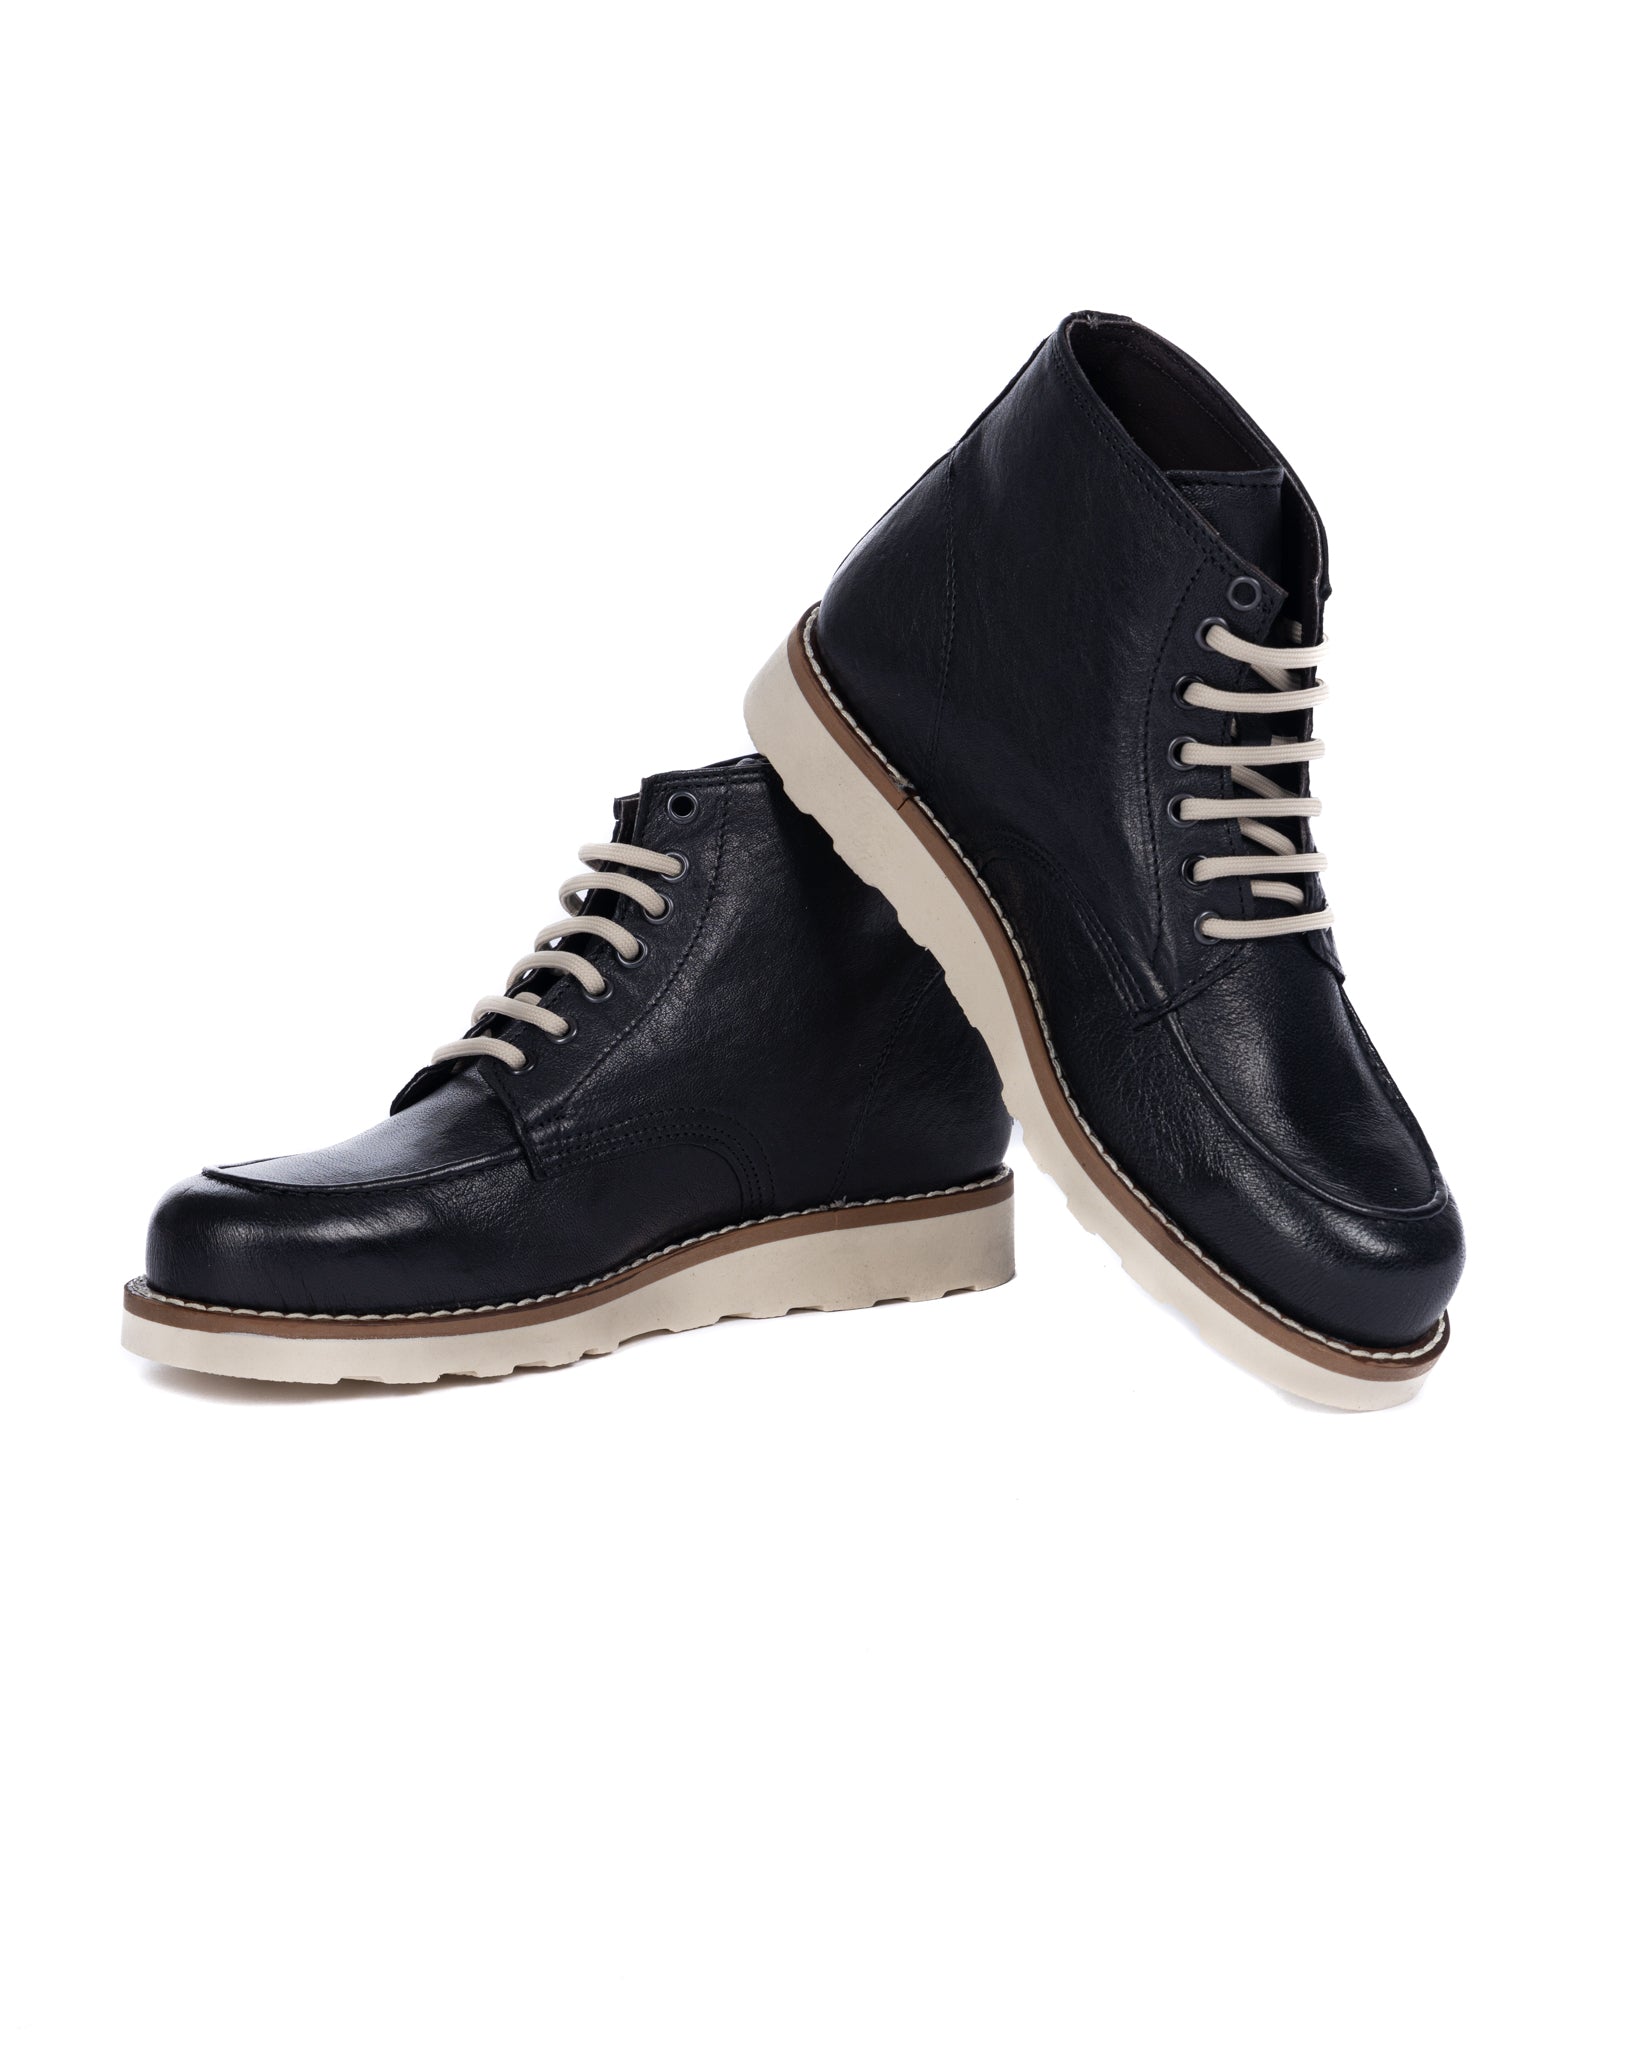 Moon - black leather boot